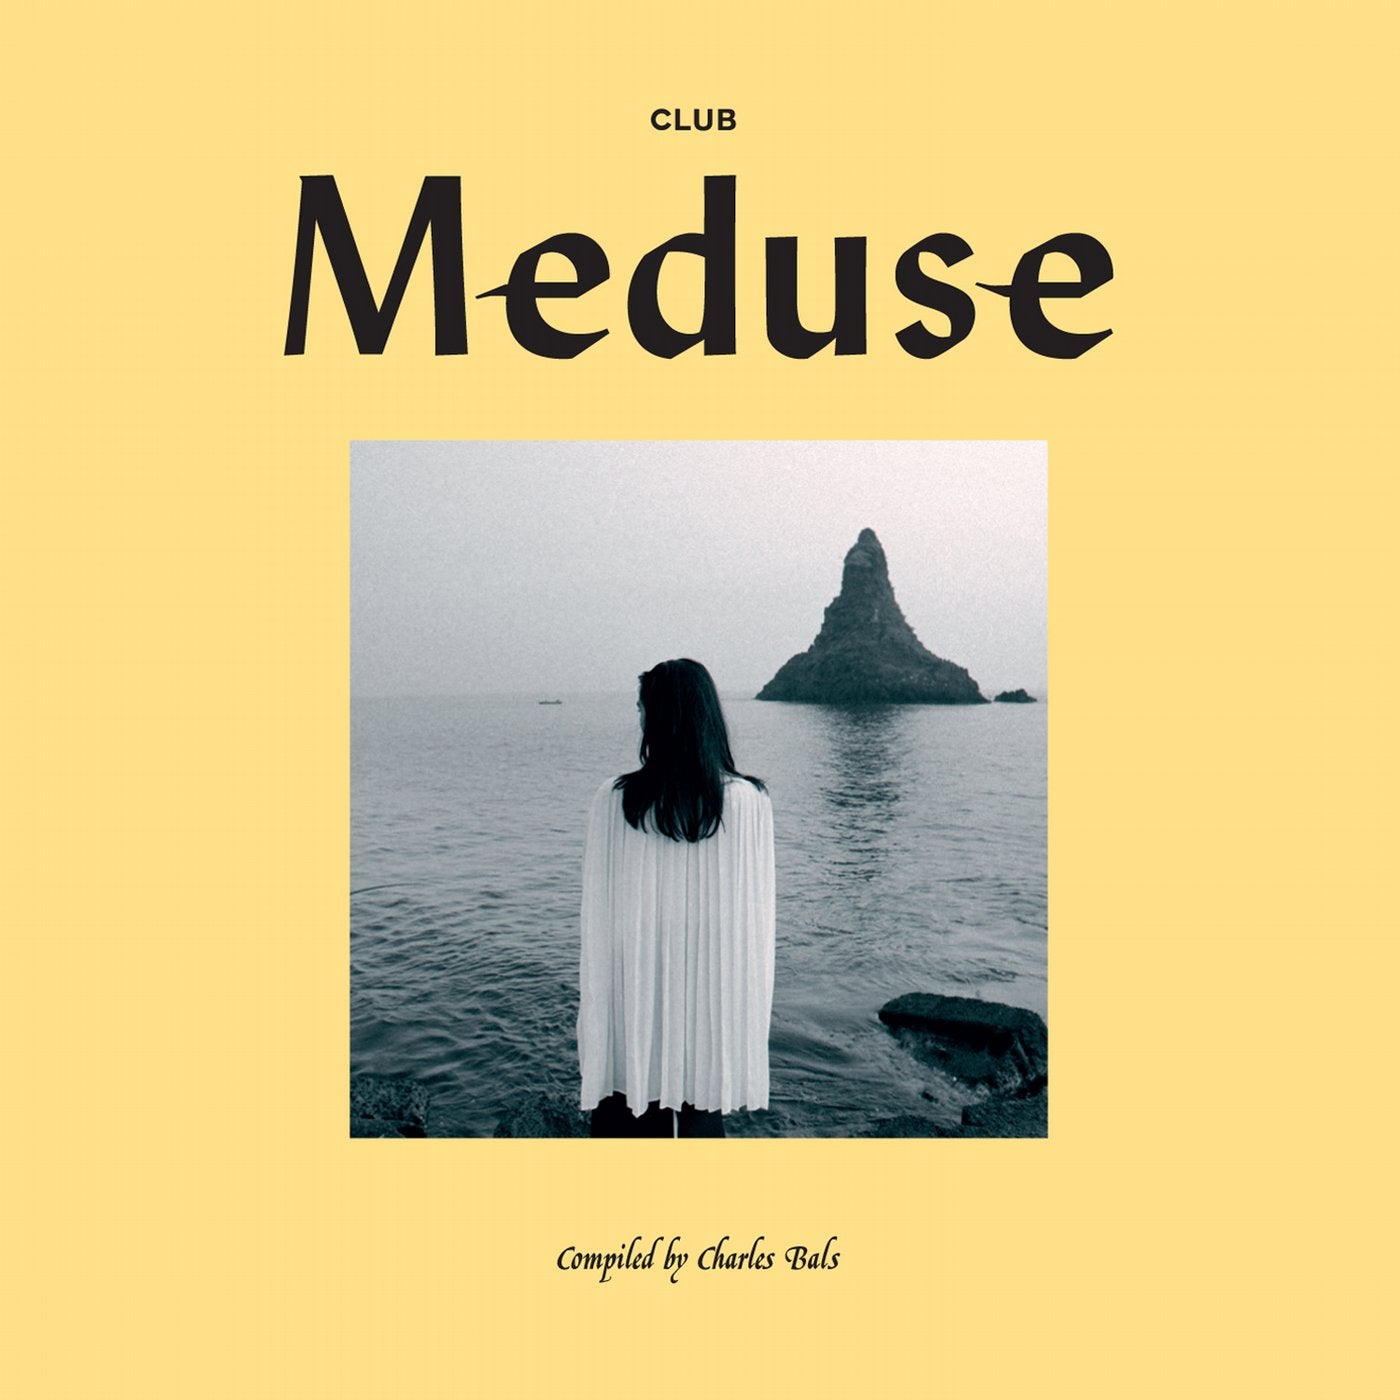 Club Meduse Compiled By Charles Bals